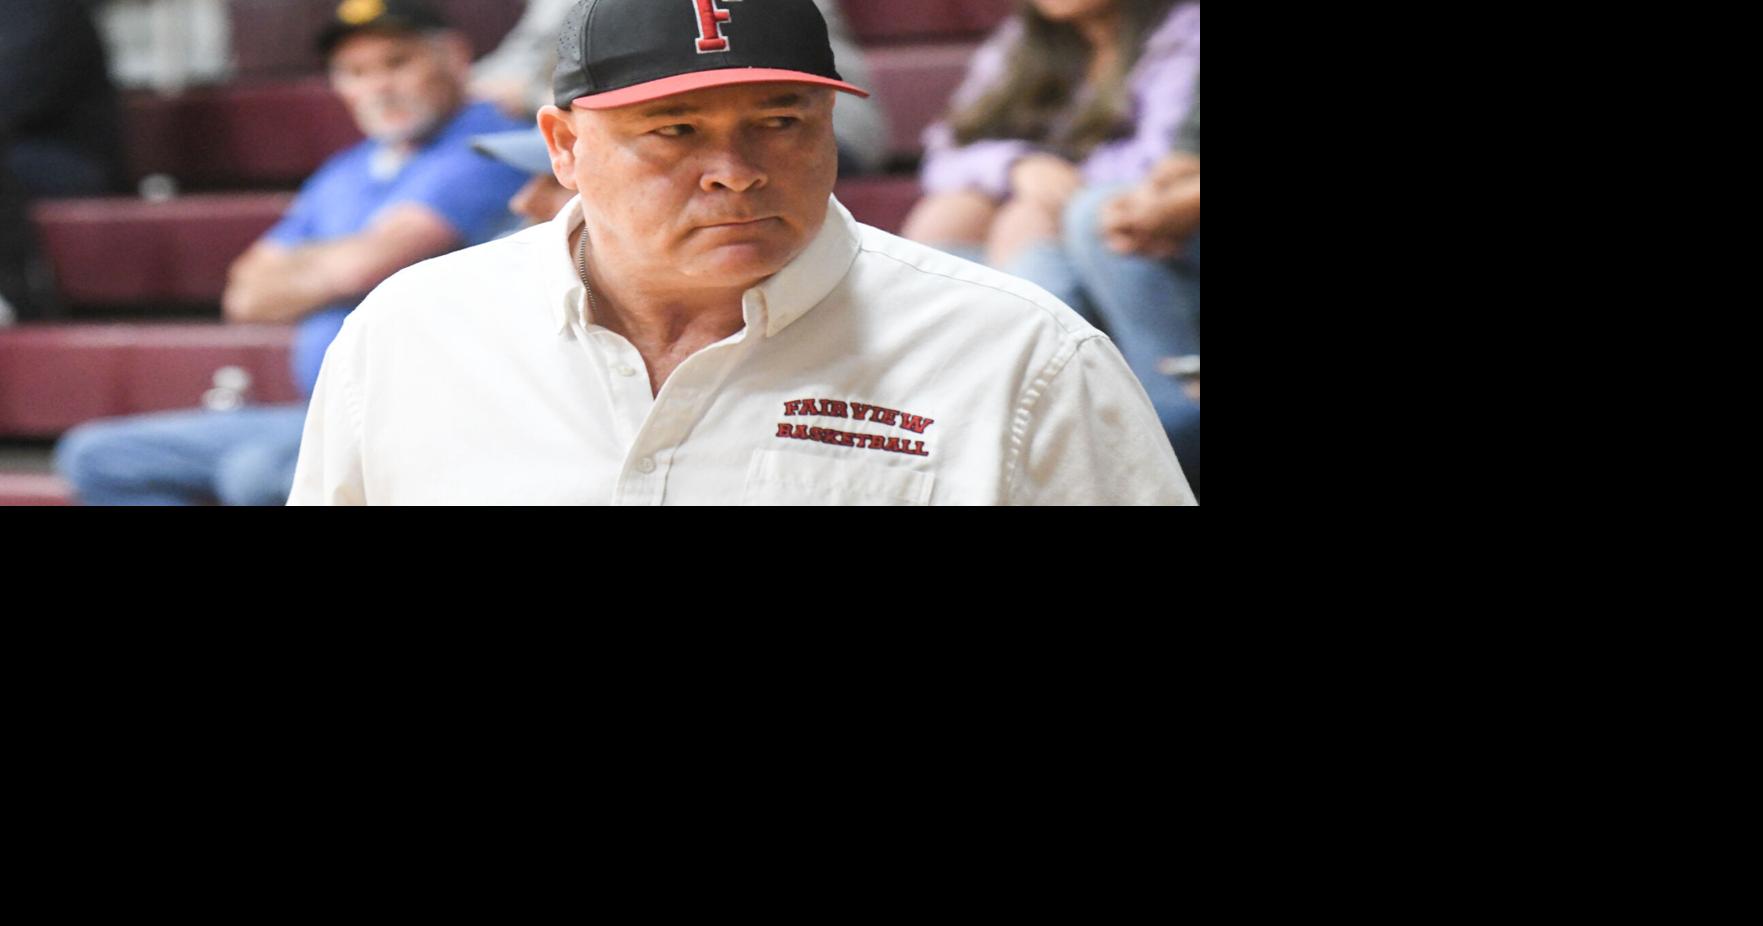 Thompson resigns at Fairview